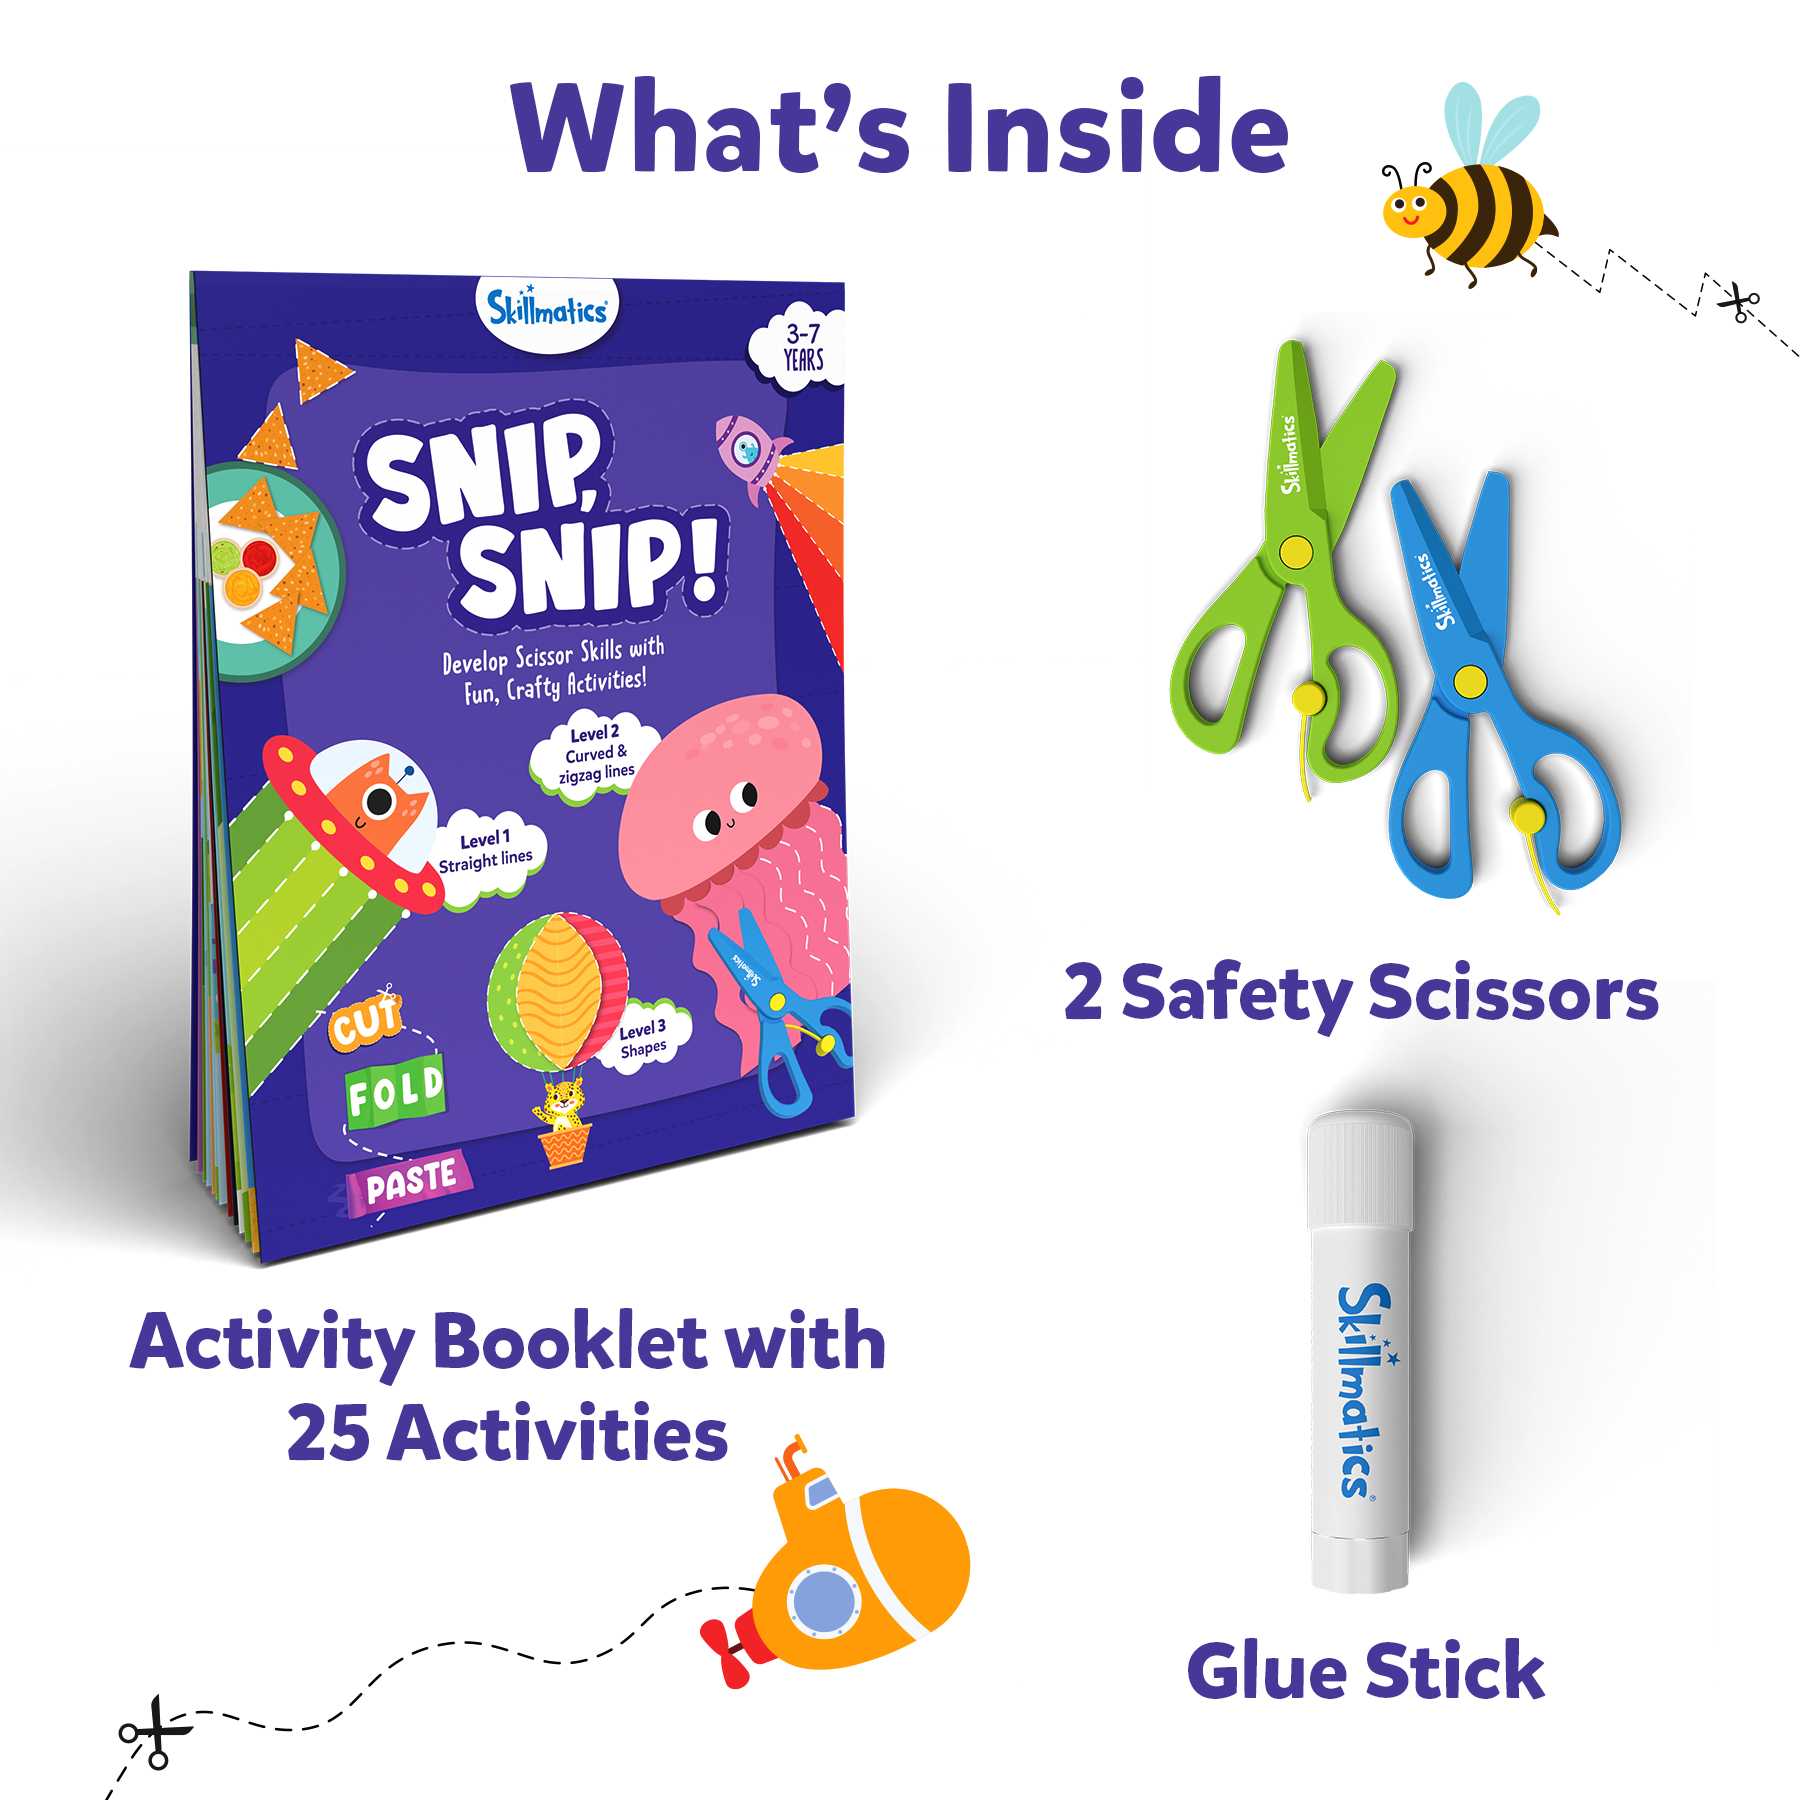 Skillmatics Art & Craft Activity Kit - Snip, Snip, Practice Scissor Skills with Activity Book, Craft Kits, 25 DIY Activities, Gifts for Ages 3 to 7